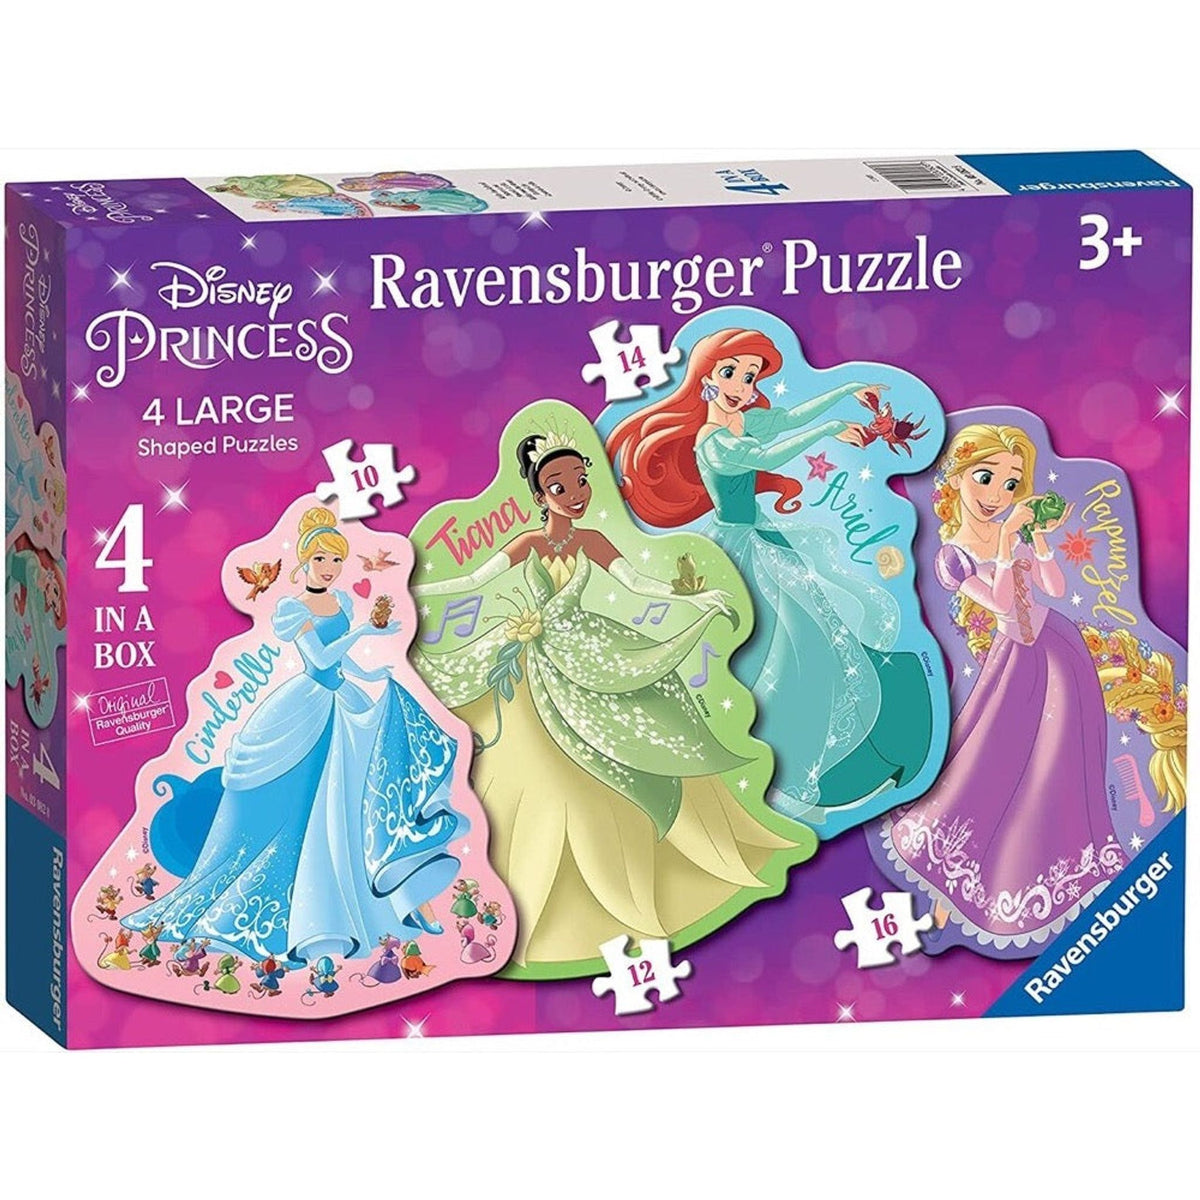 Ravensburger - Disney Princess 4 Shaped Puzzle in a Box - Toybox Tales